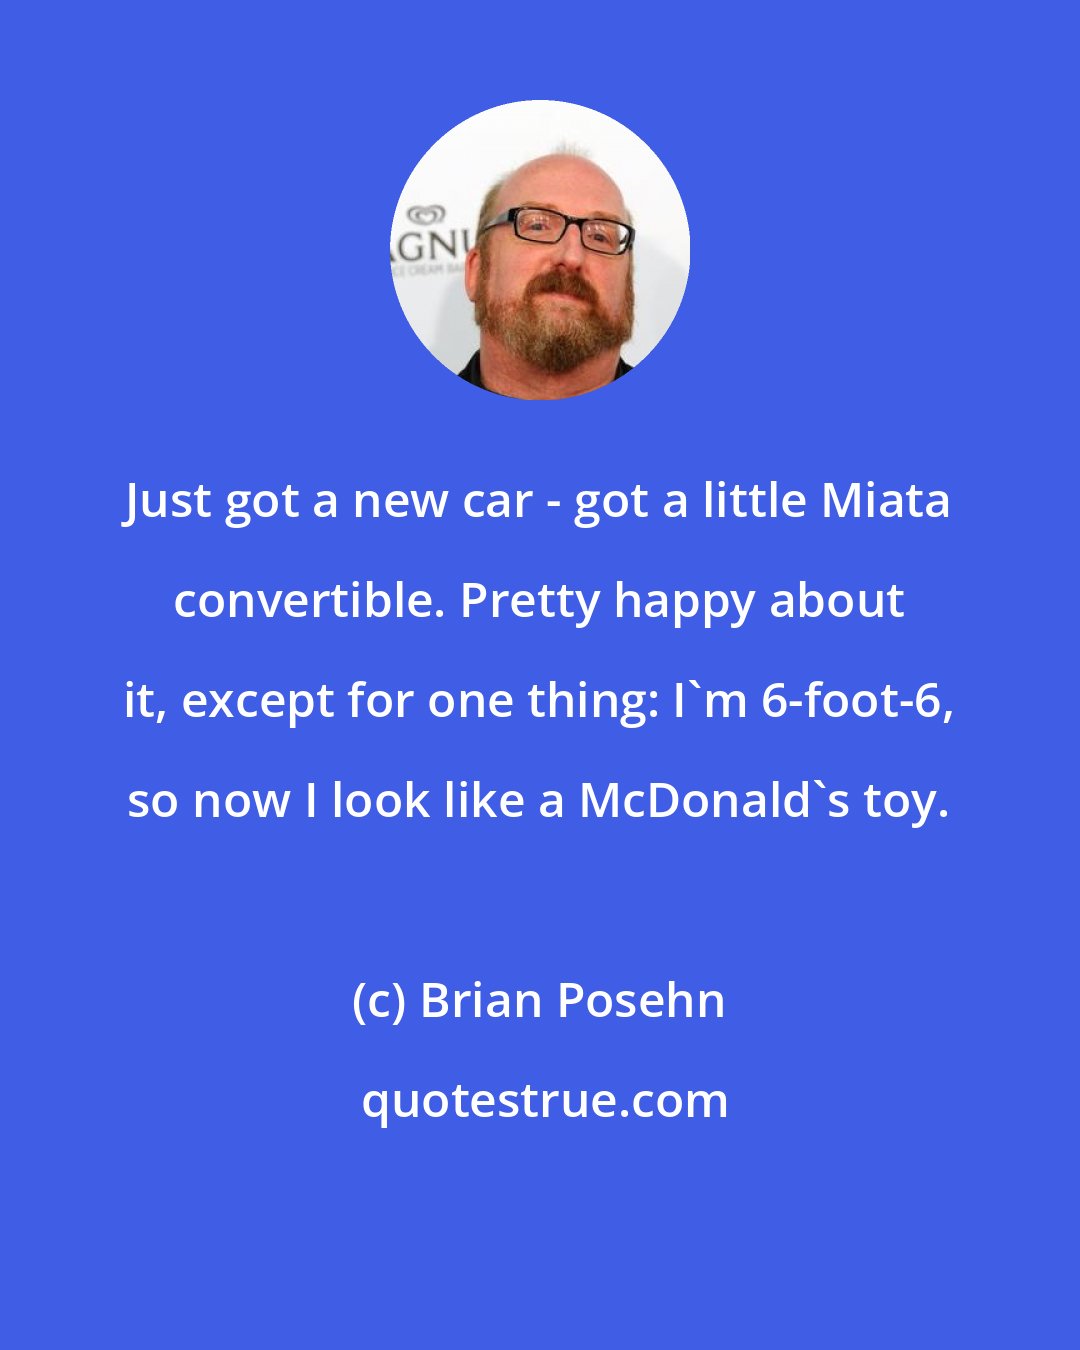 Brian Posehn: Just got a new car - got a little Miata convertible. Pretty happy about it, except for one thing: I'm 6-foot-6, so now I look like a McDonald's toy.